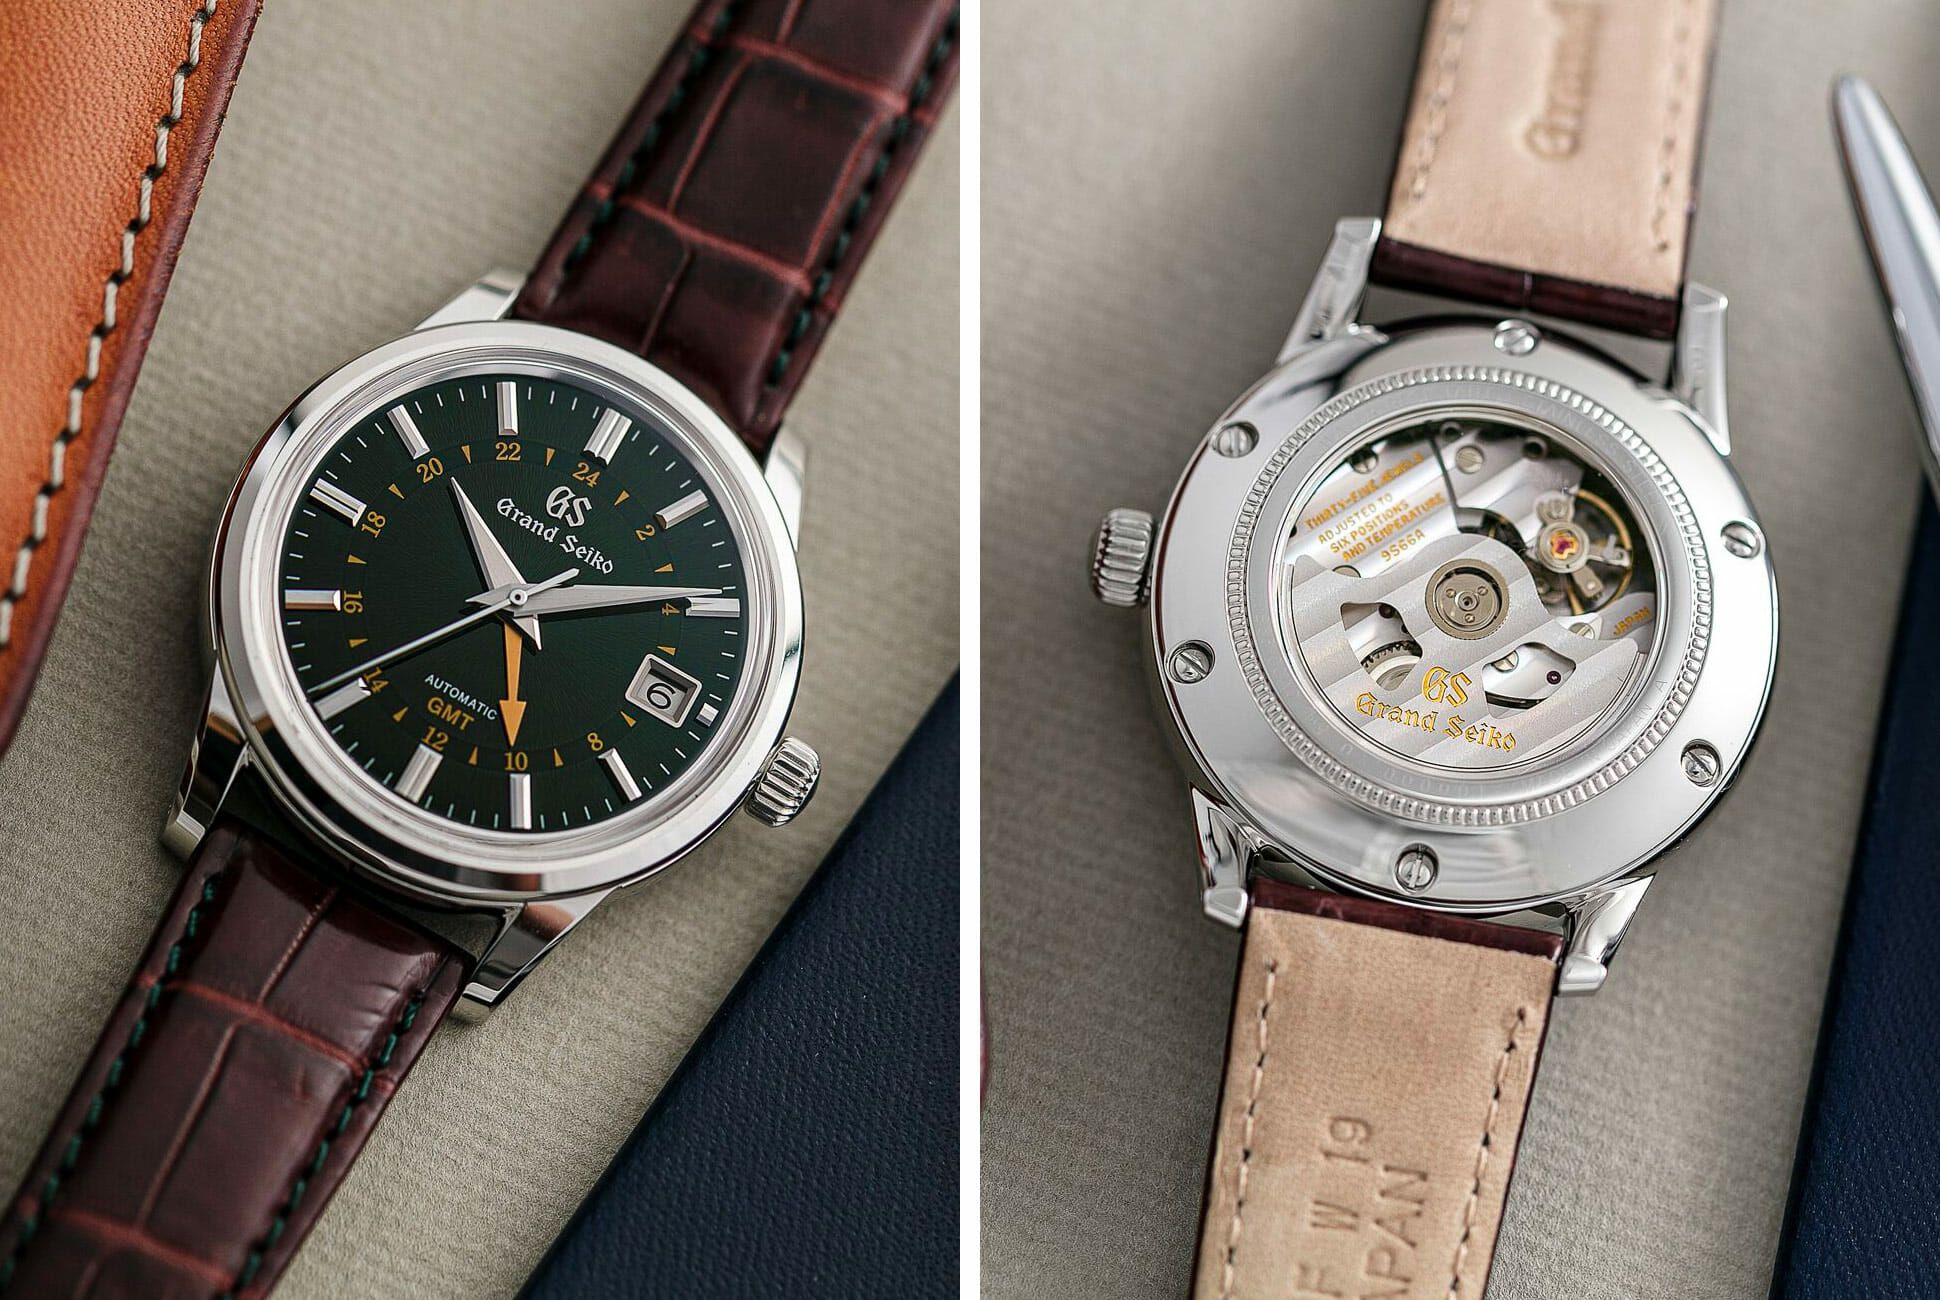 Grand Seiko's GMT Watch Gets a Striking New Green Dial